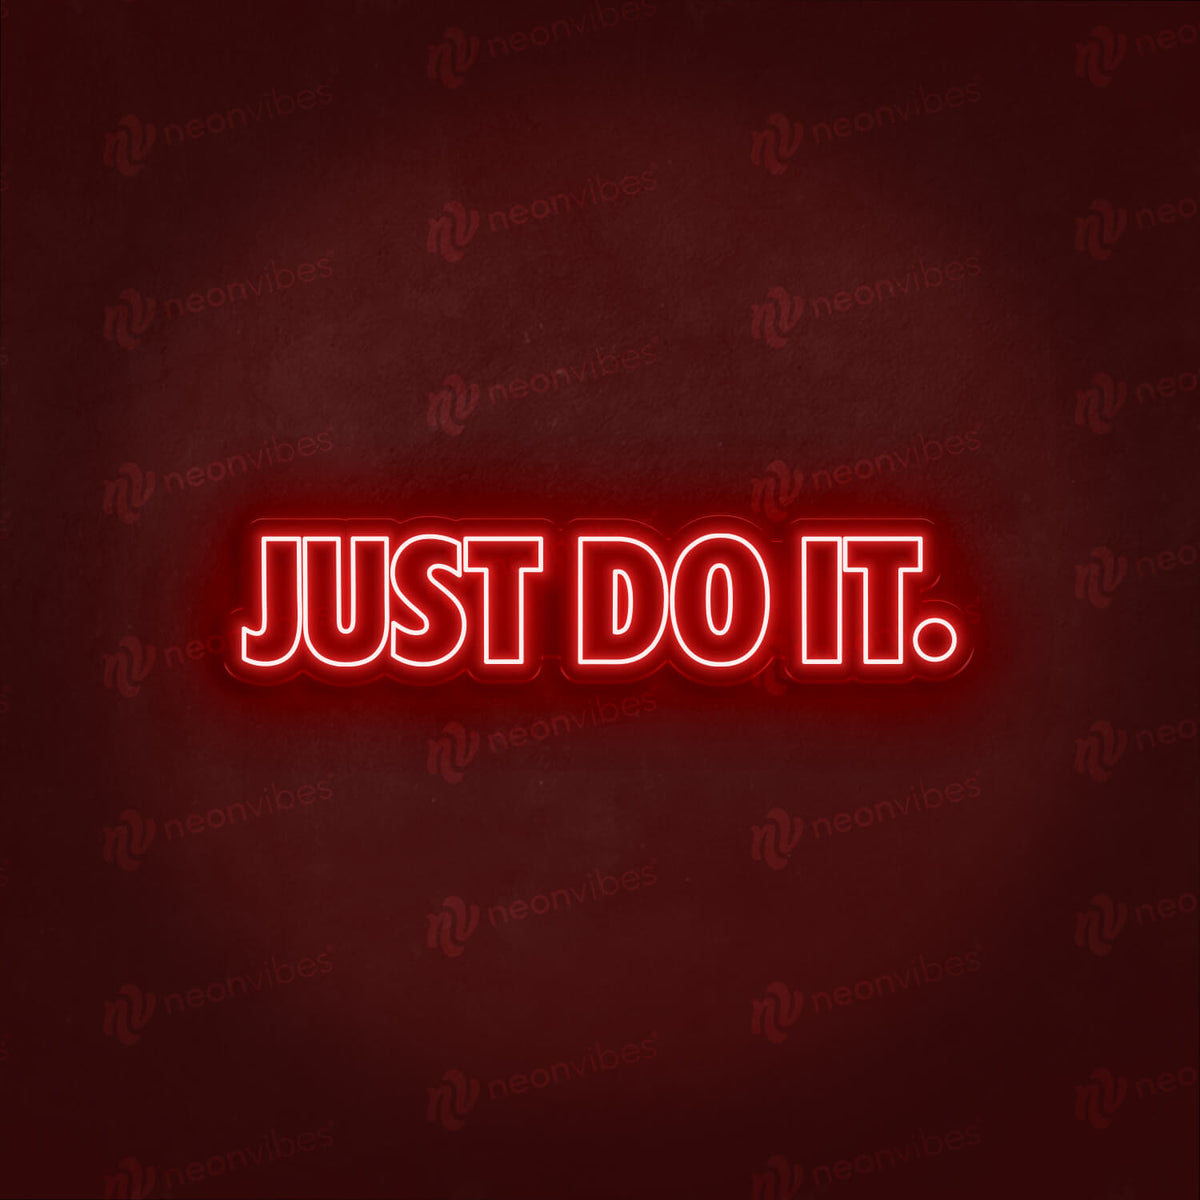 Just Do It neon sign